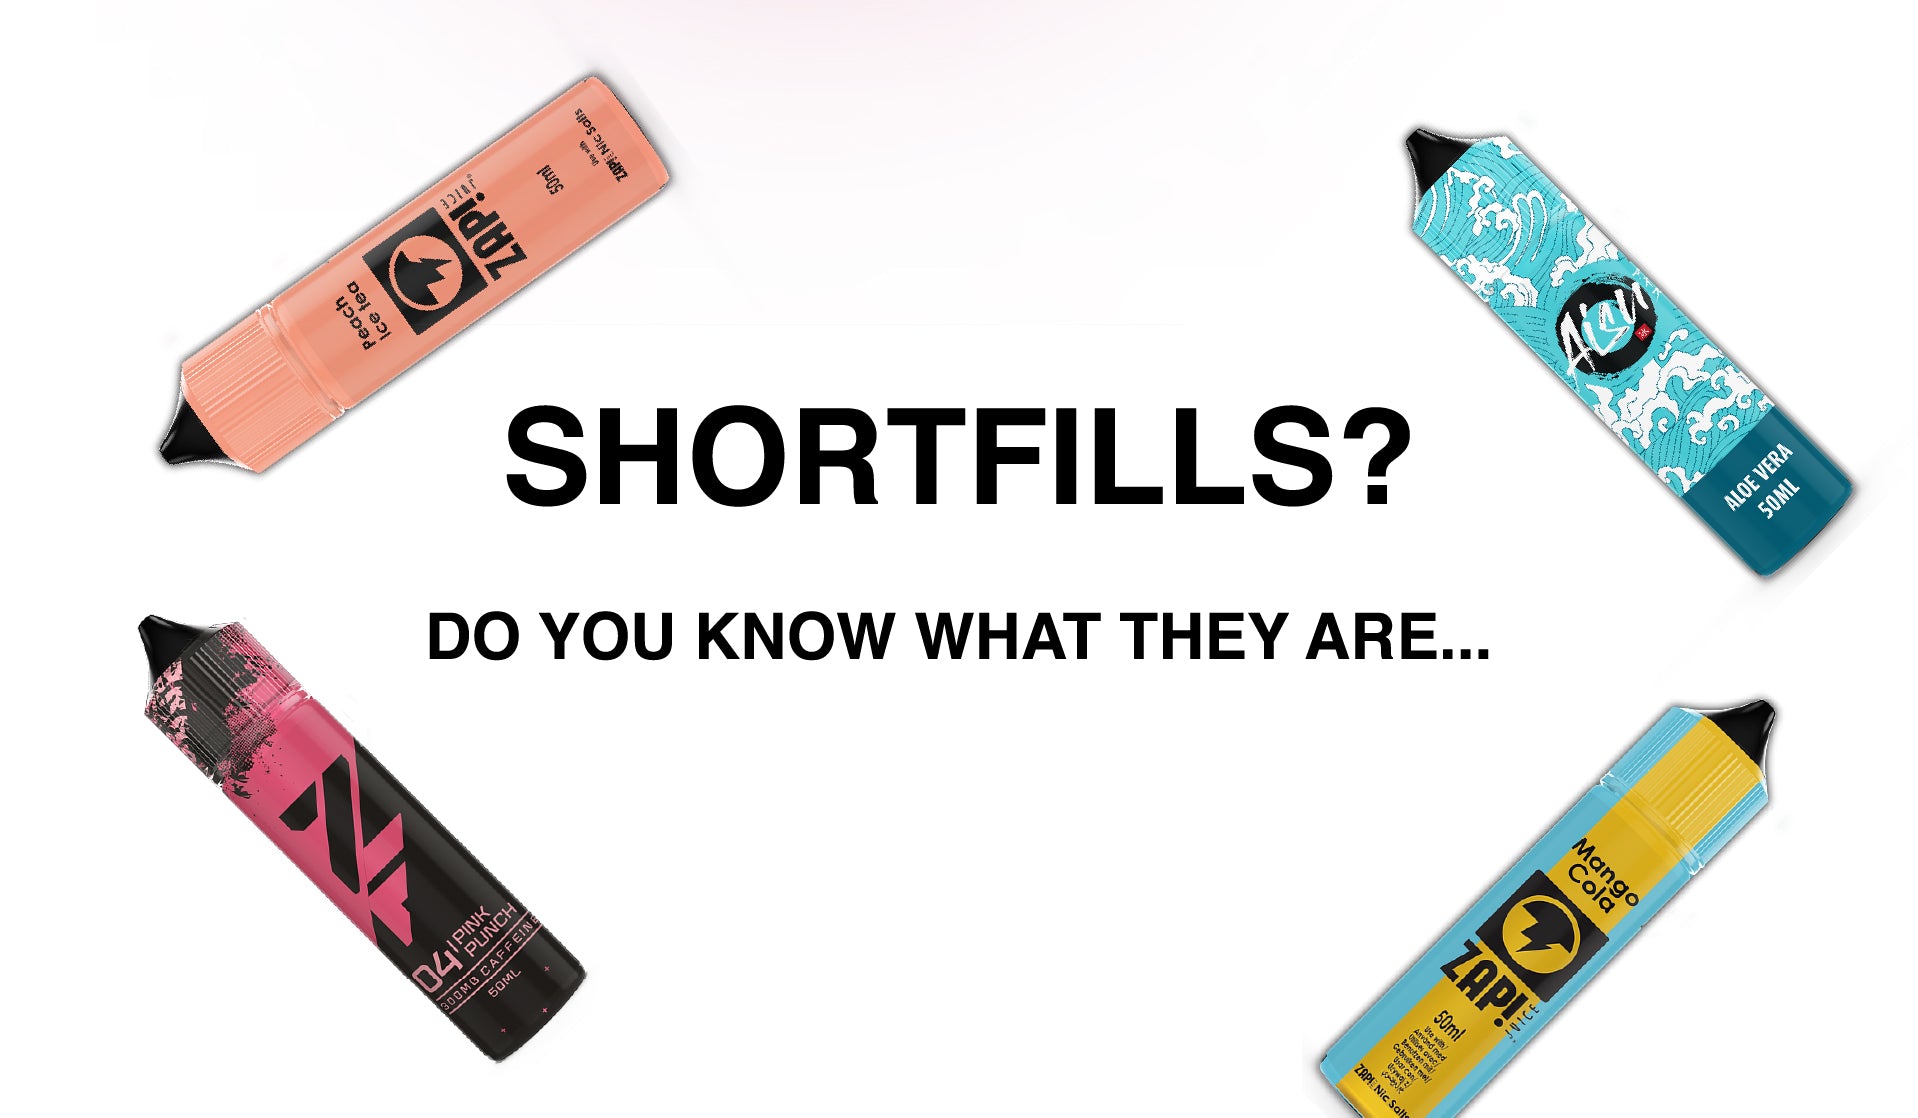 What is ZAP!Juice Shorfill?